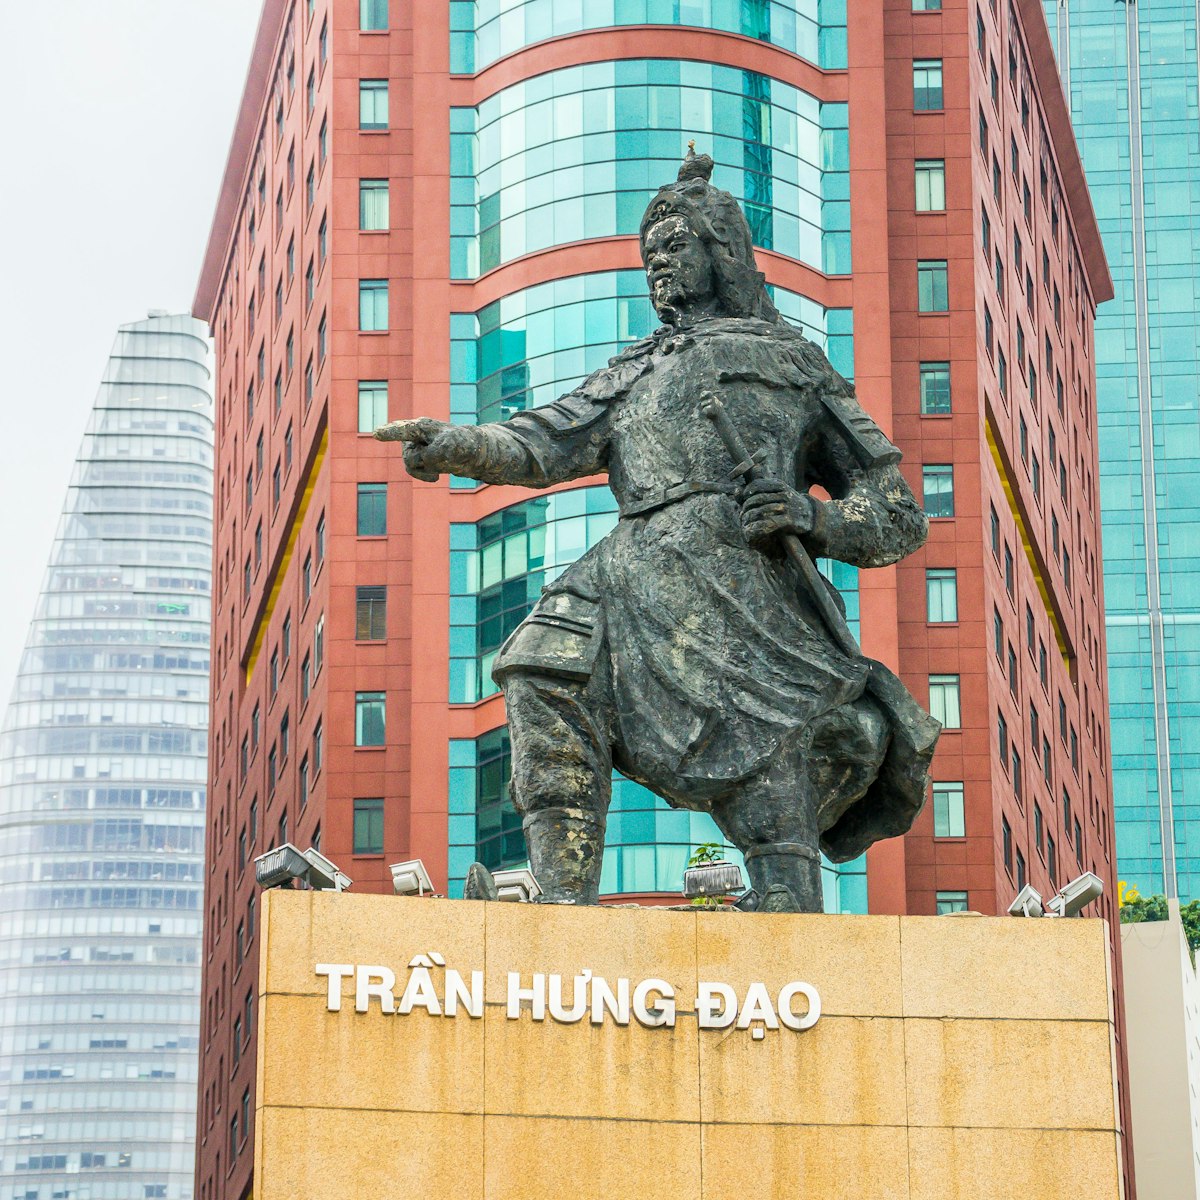 Tran Hung Dao statue in Me Linh Area of District 1, Saigon central.